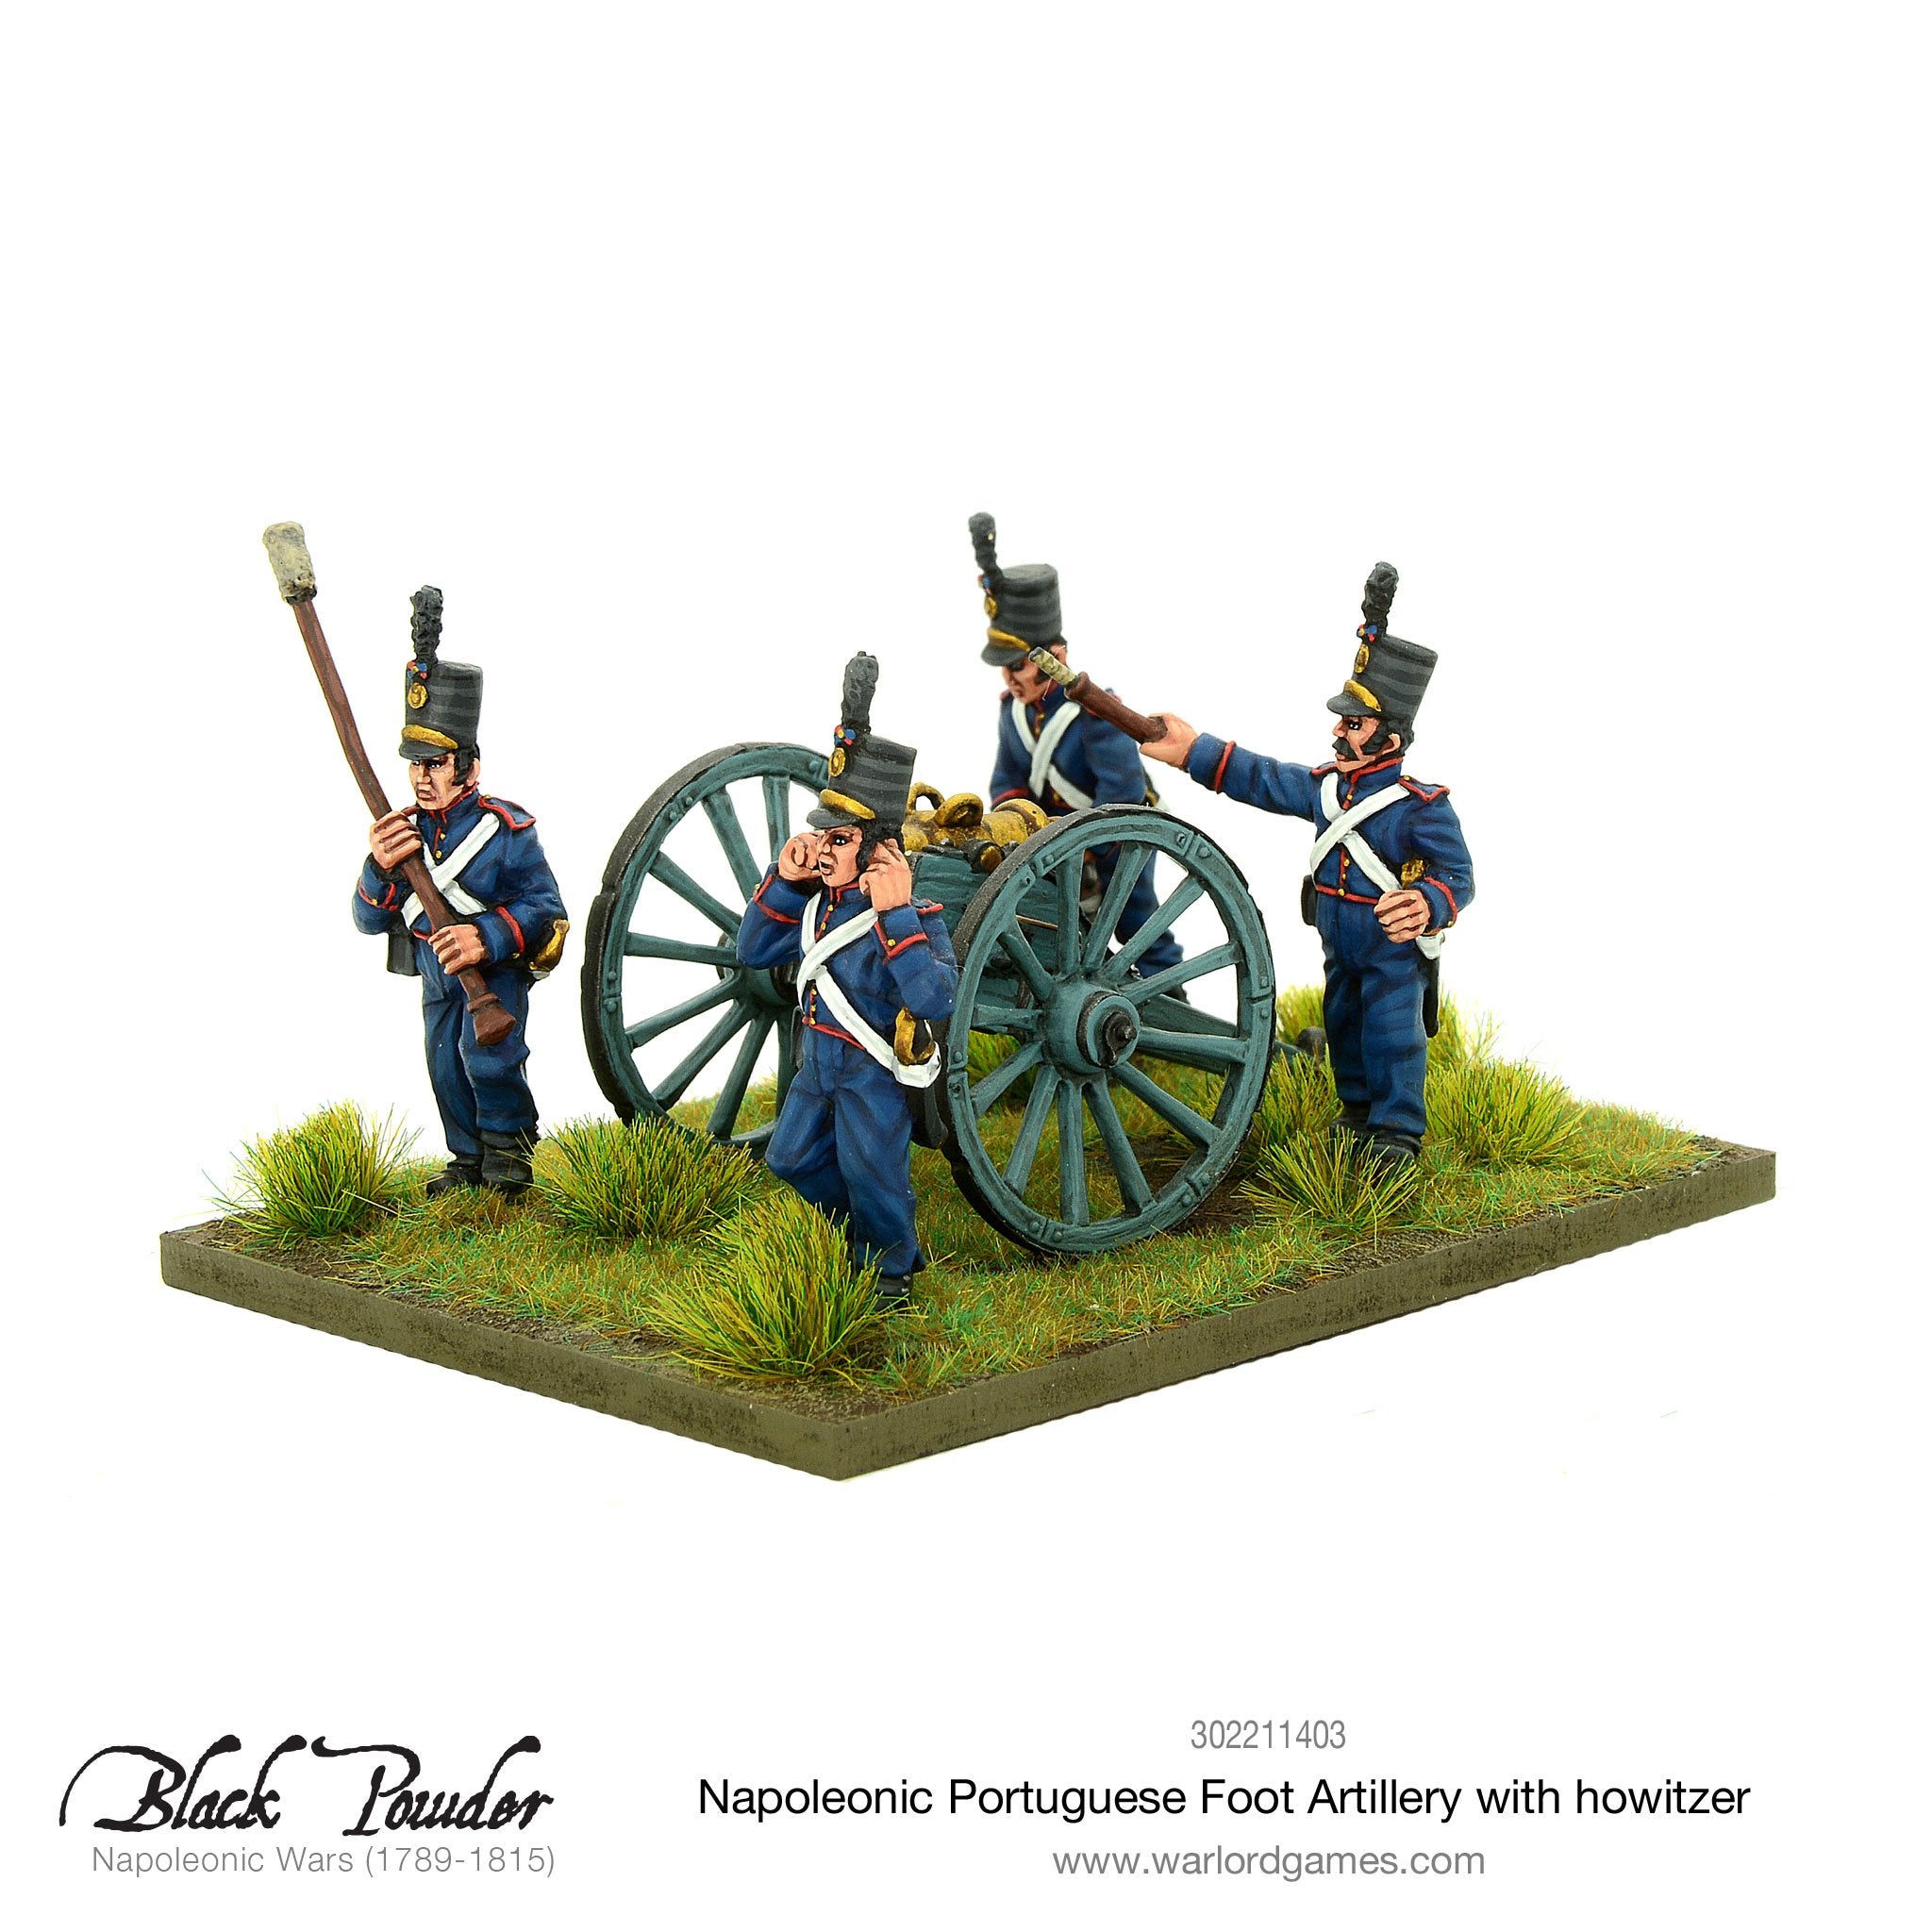 Napoleonic Portuguese Foot Artillery with howitzer